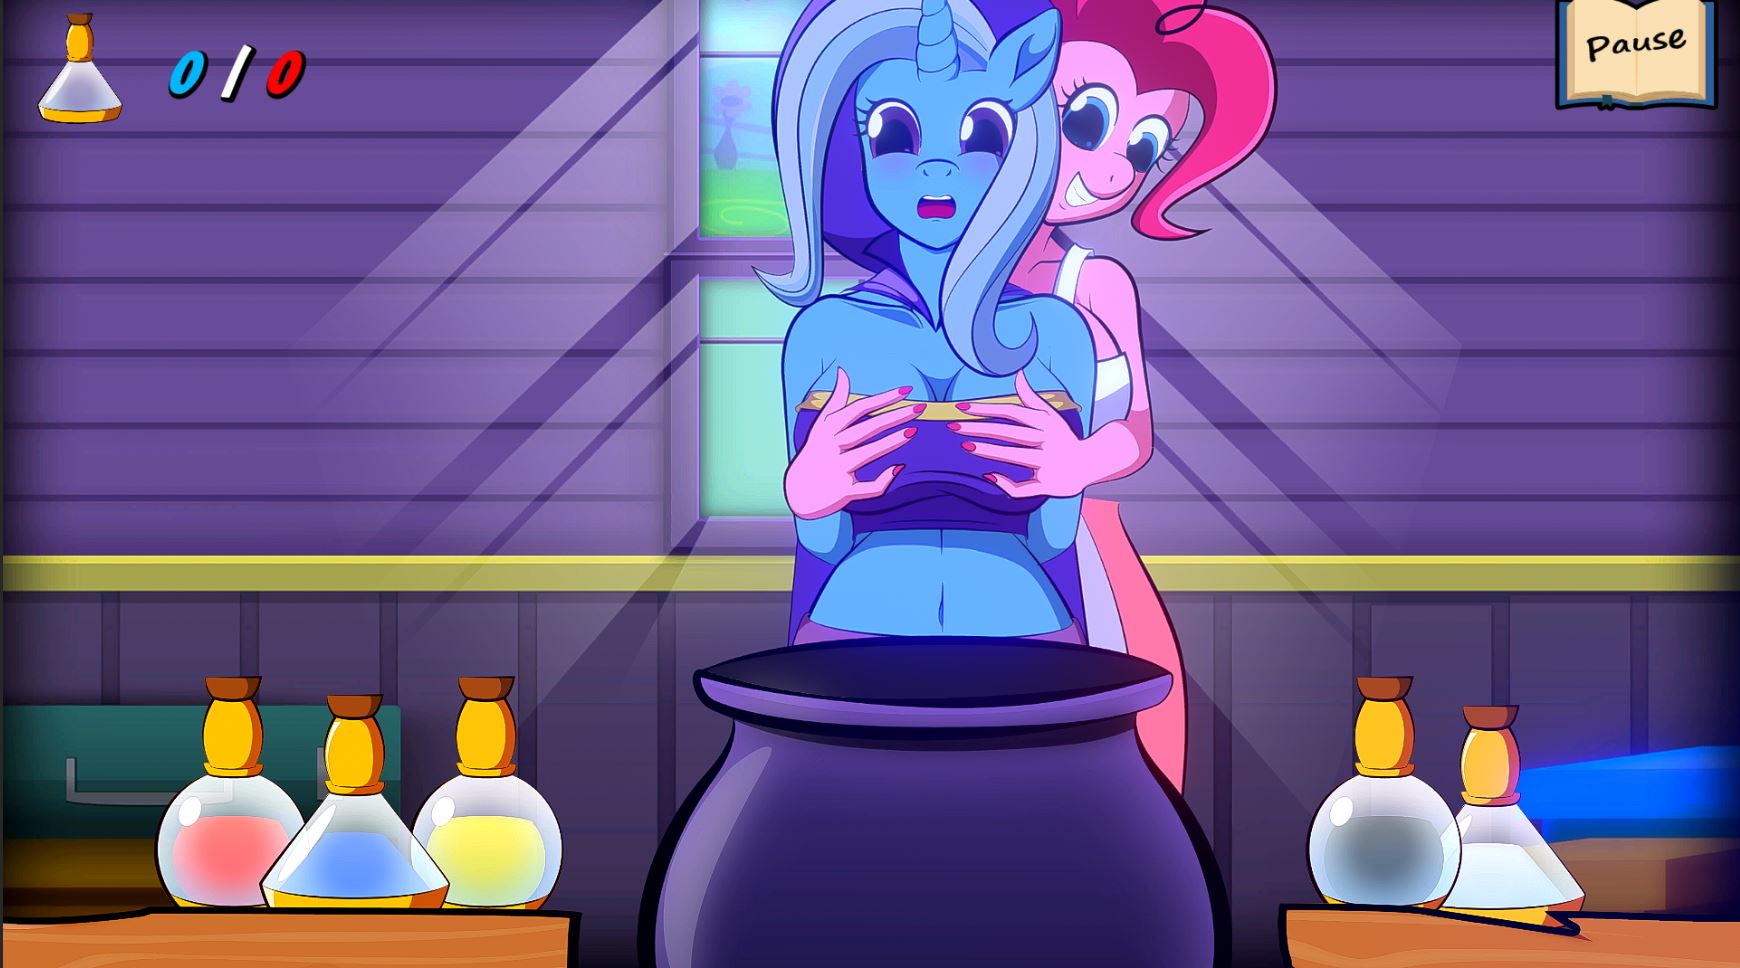 Unity] Cooking with Pinkie Pie 2 - v0.0.2.7.5 by HentaiRed 18+ Adult xxx  Porn Game Download